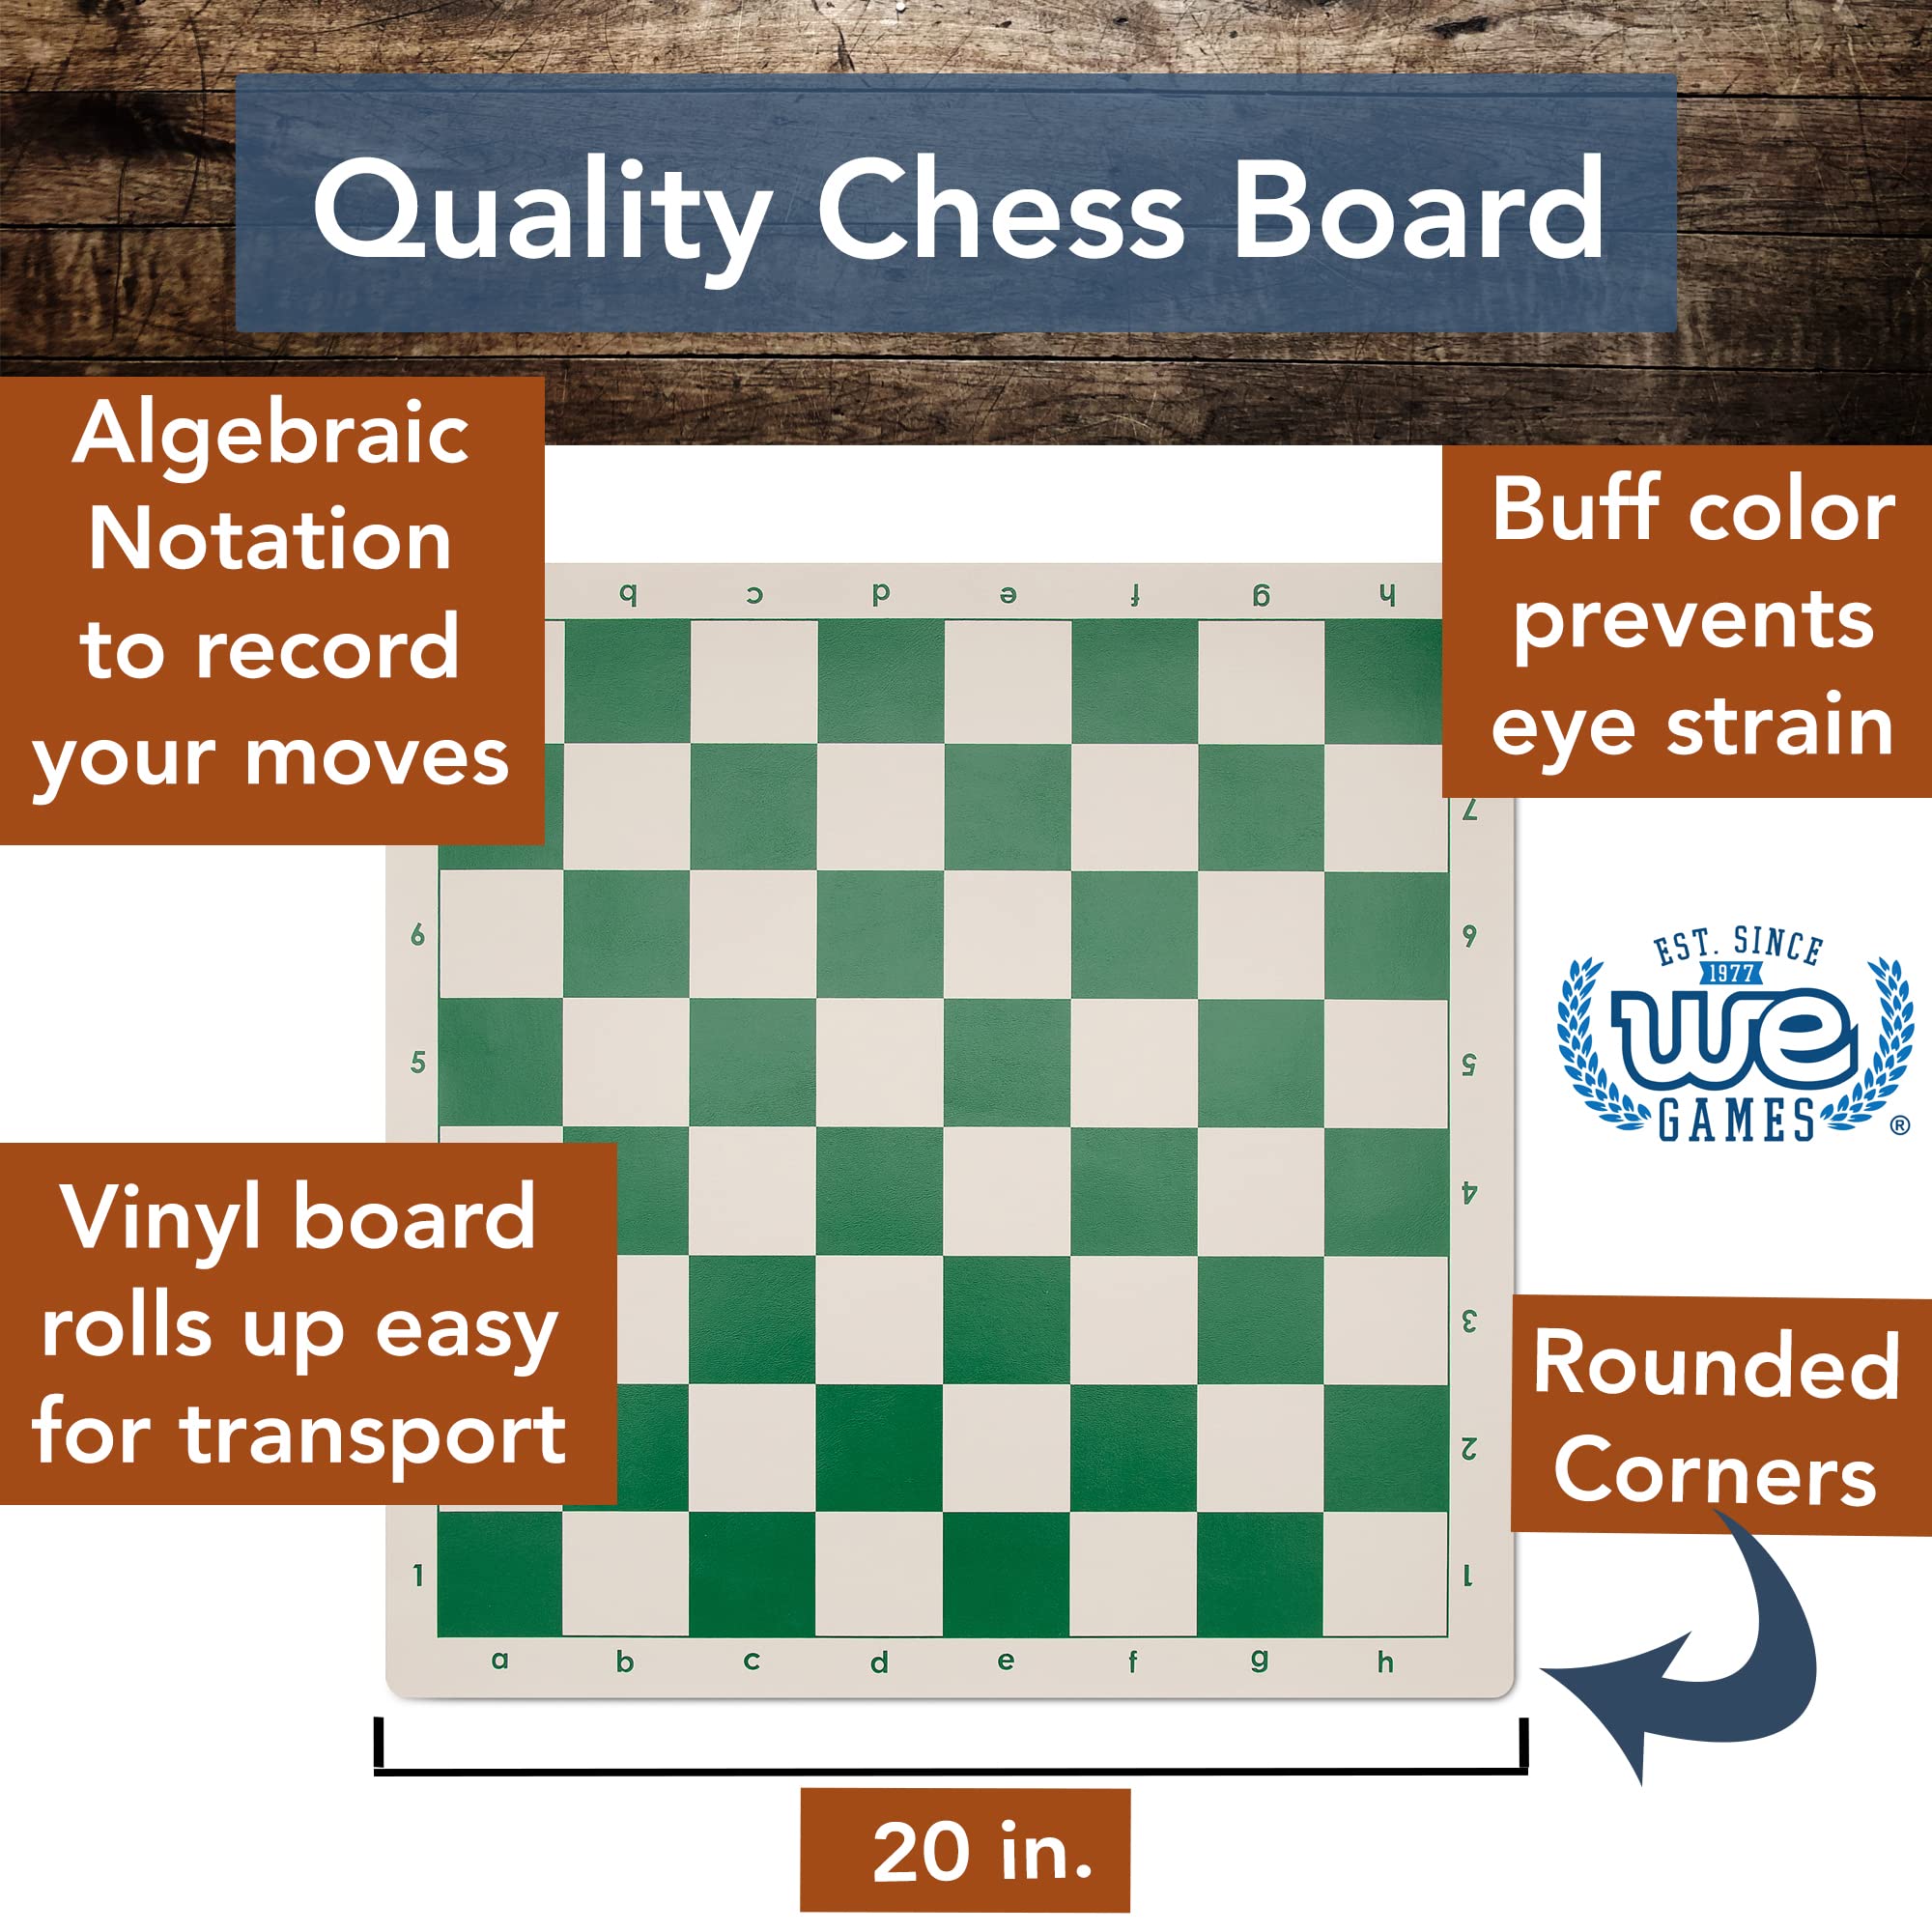 WE Games Best Value Tournament Chess Set - Staunton Chess Pieces and Green Roll-Up Vinyl Chess Board